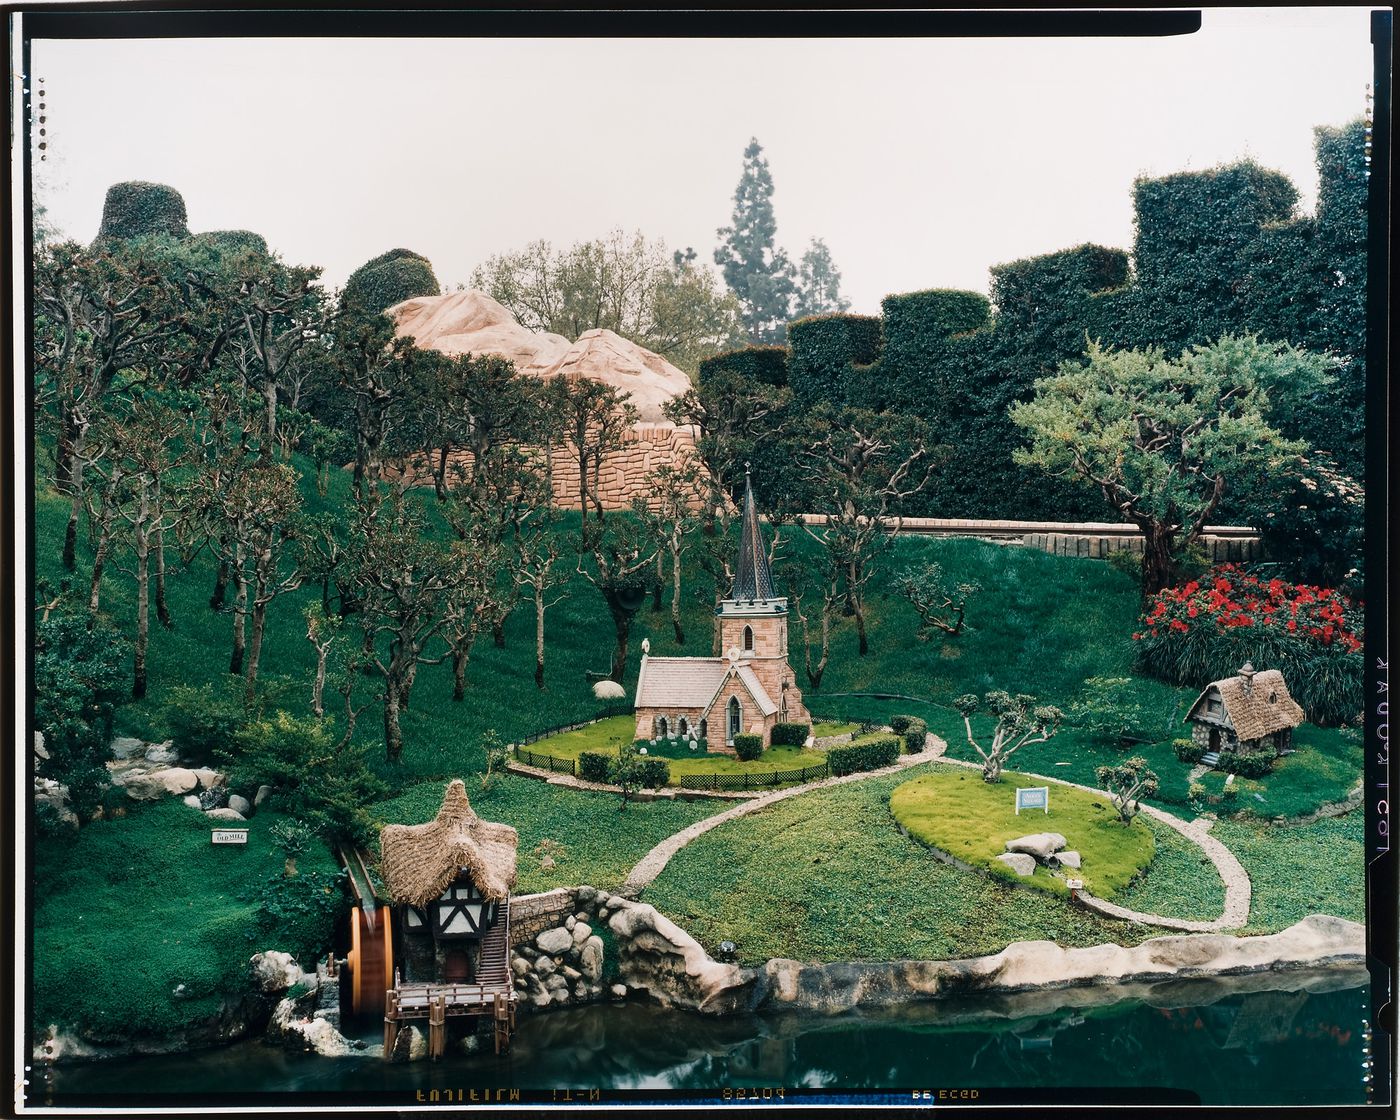 View of Storybook Land with miniature church, house and old mill on artificial stretch of water, Disneyland, Anaheim, California